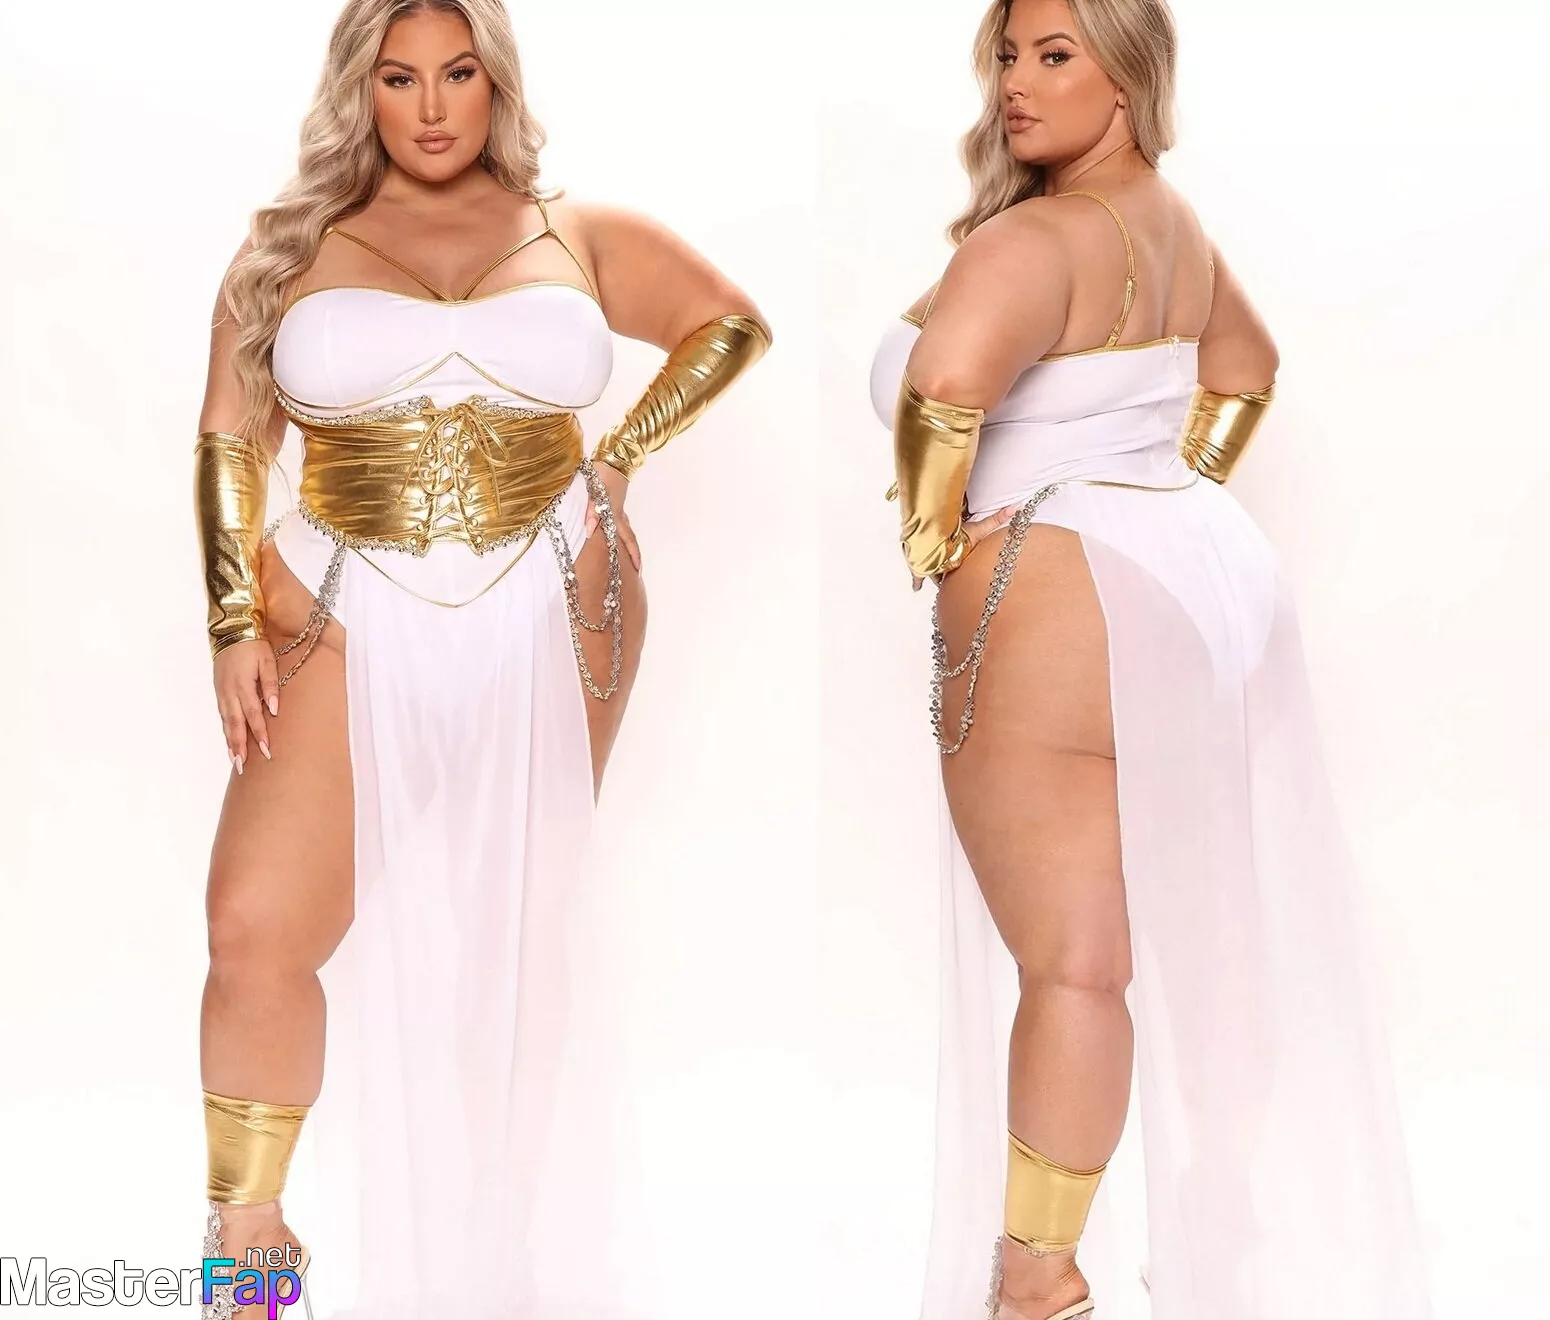 Discover the Sultry Side of Ashley Alexiss with These Leaked Pictures